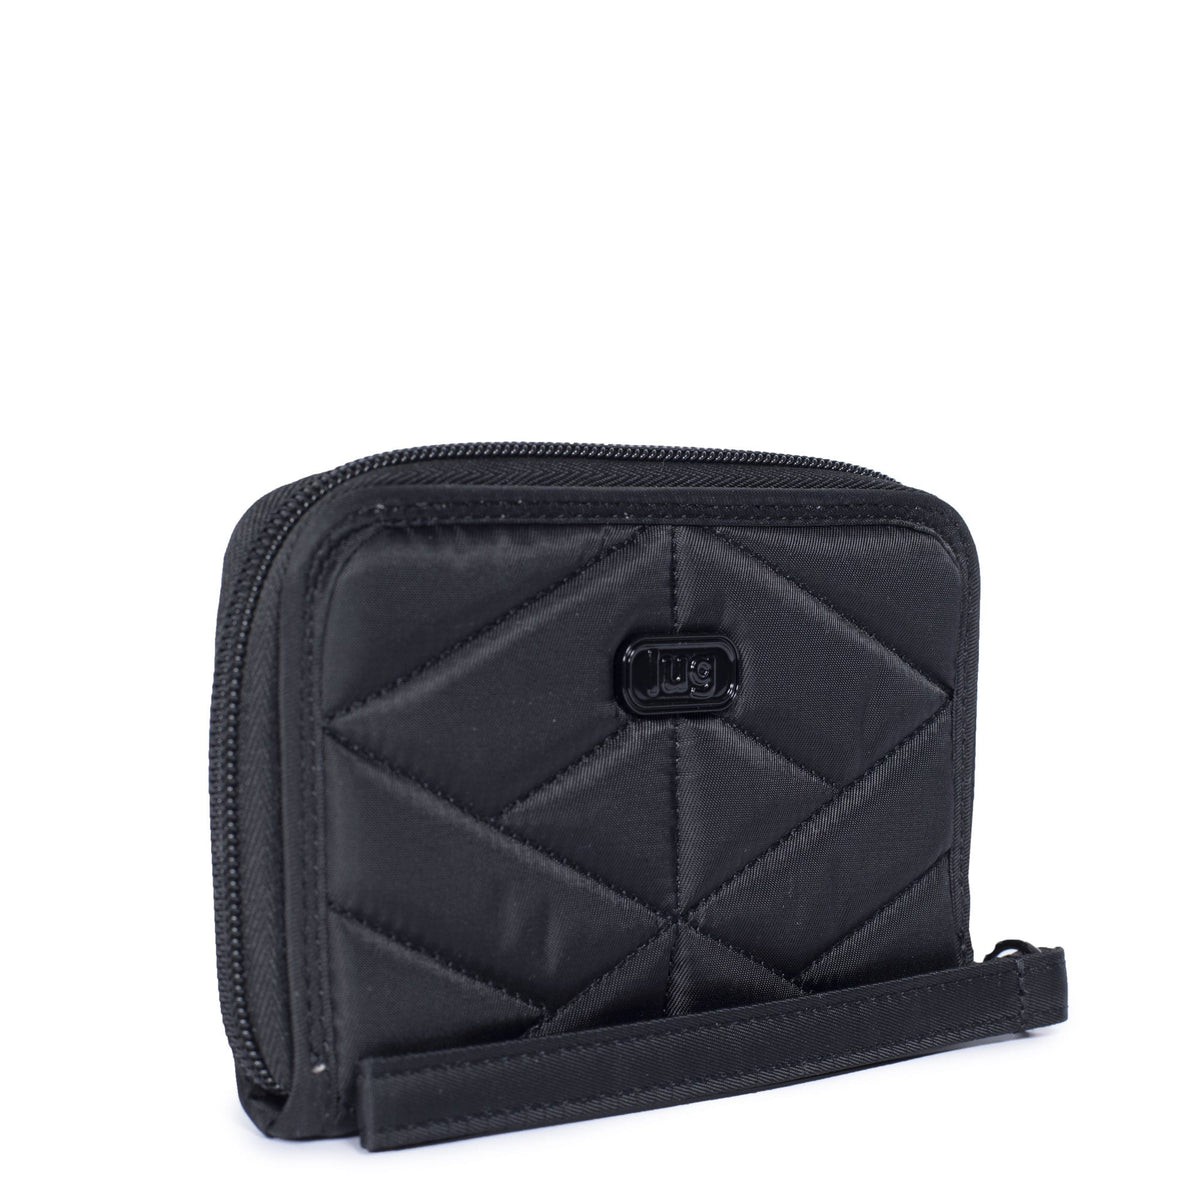 Rodeo 2 Compact RFID Wallet